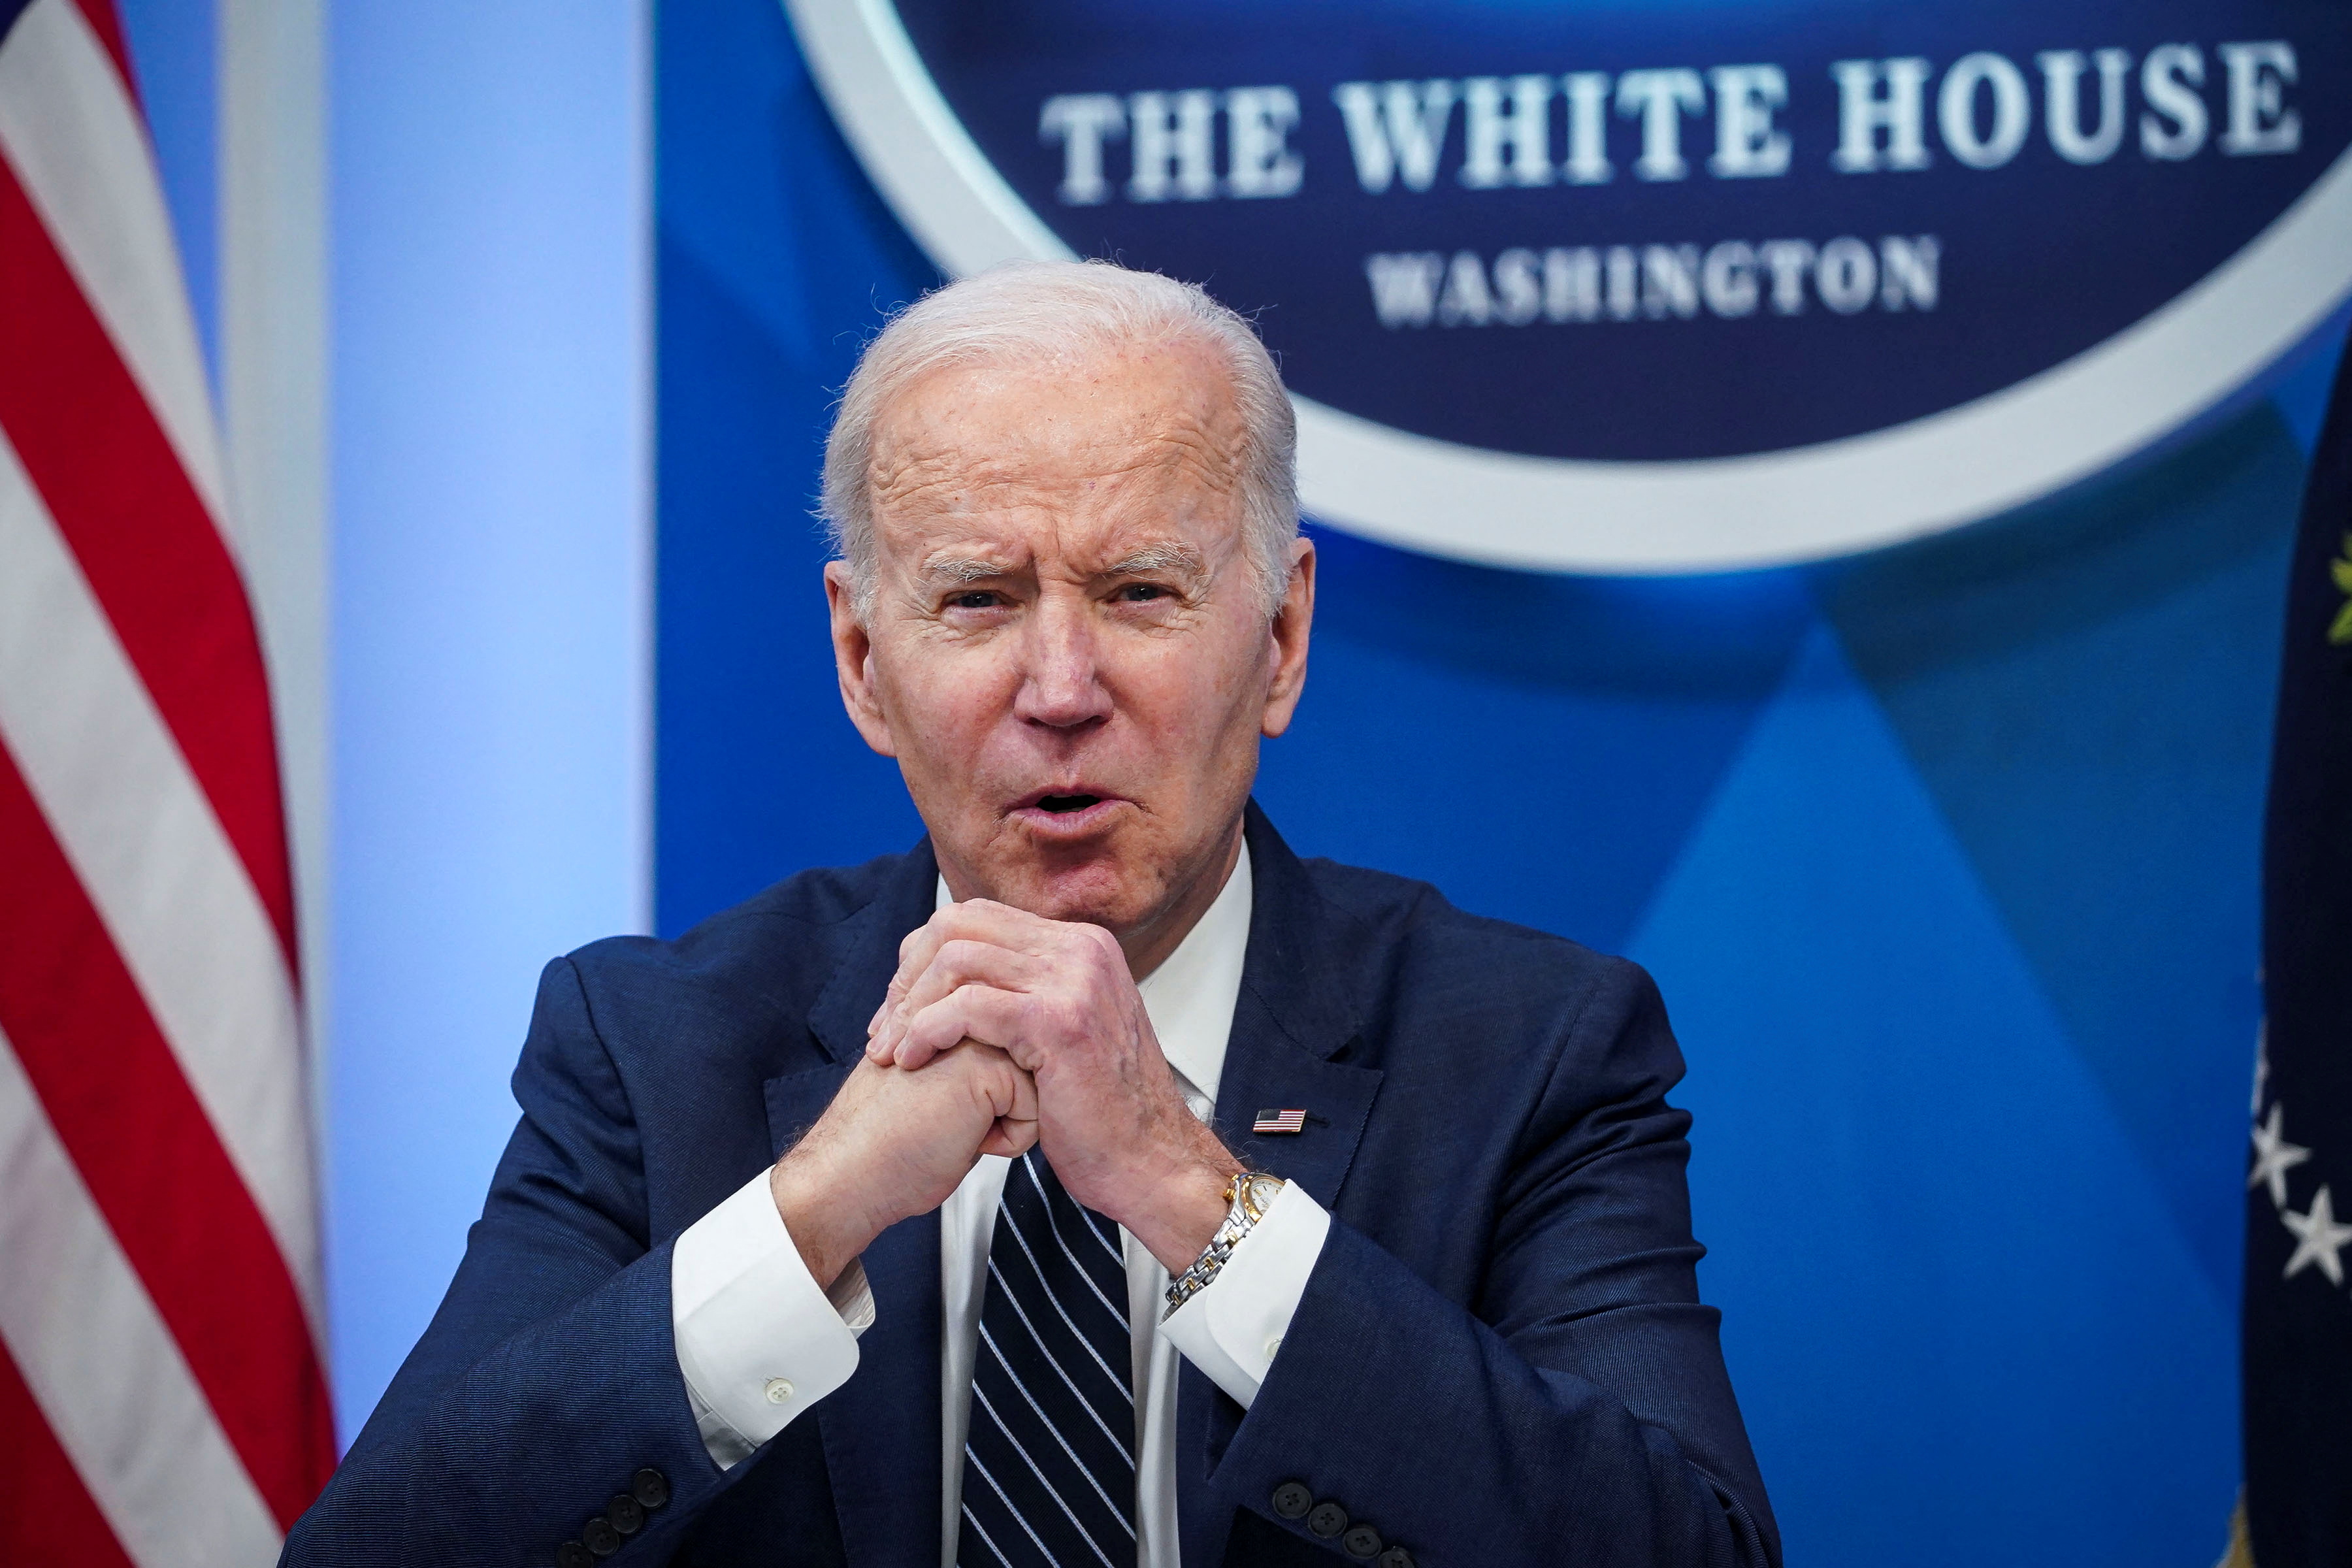 U.S. President Biden speaks about health research at White House in Washington